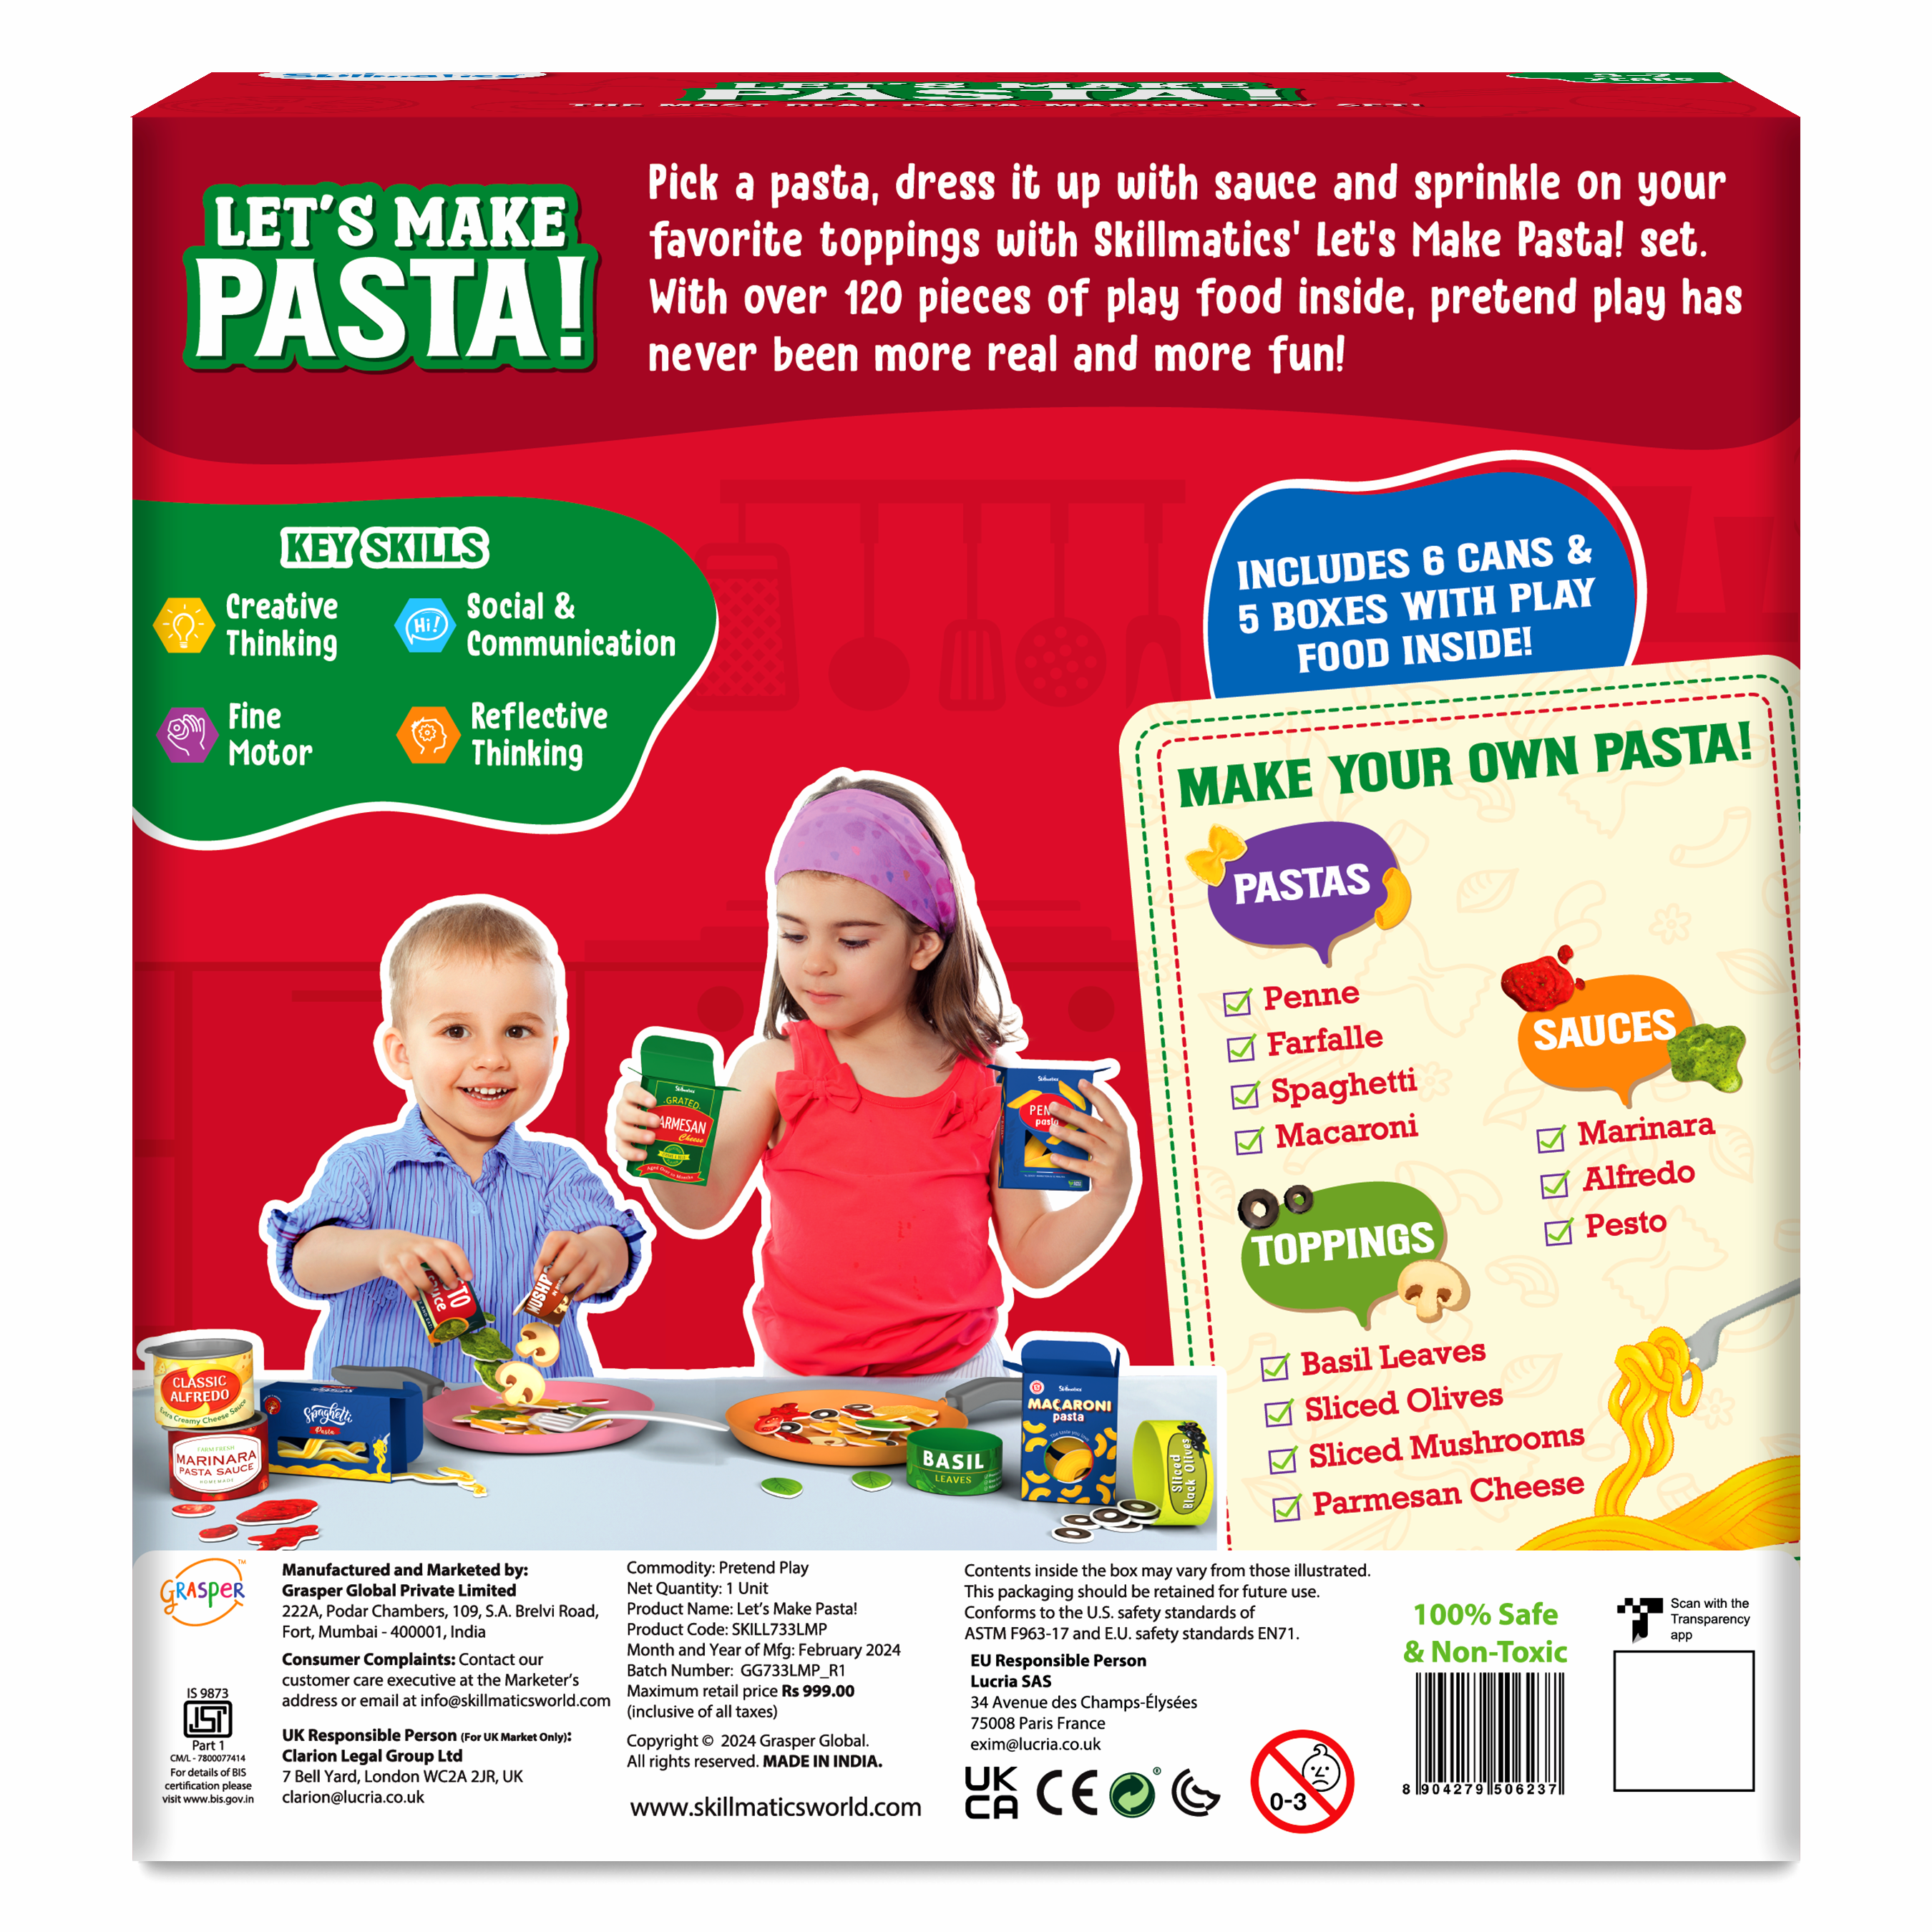 Skillmatics Pretend Play Pasta Set - 11 Containers, 120+ Play Food Items For Child's Play, Back-to-School Play Kitchen Accessories, Toy Kitchen, Gifts for Kids & Toddlers Ages 3, 4, 5, 6, 7